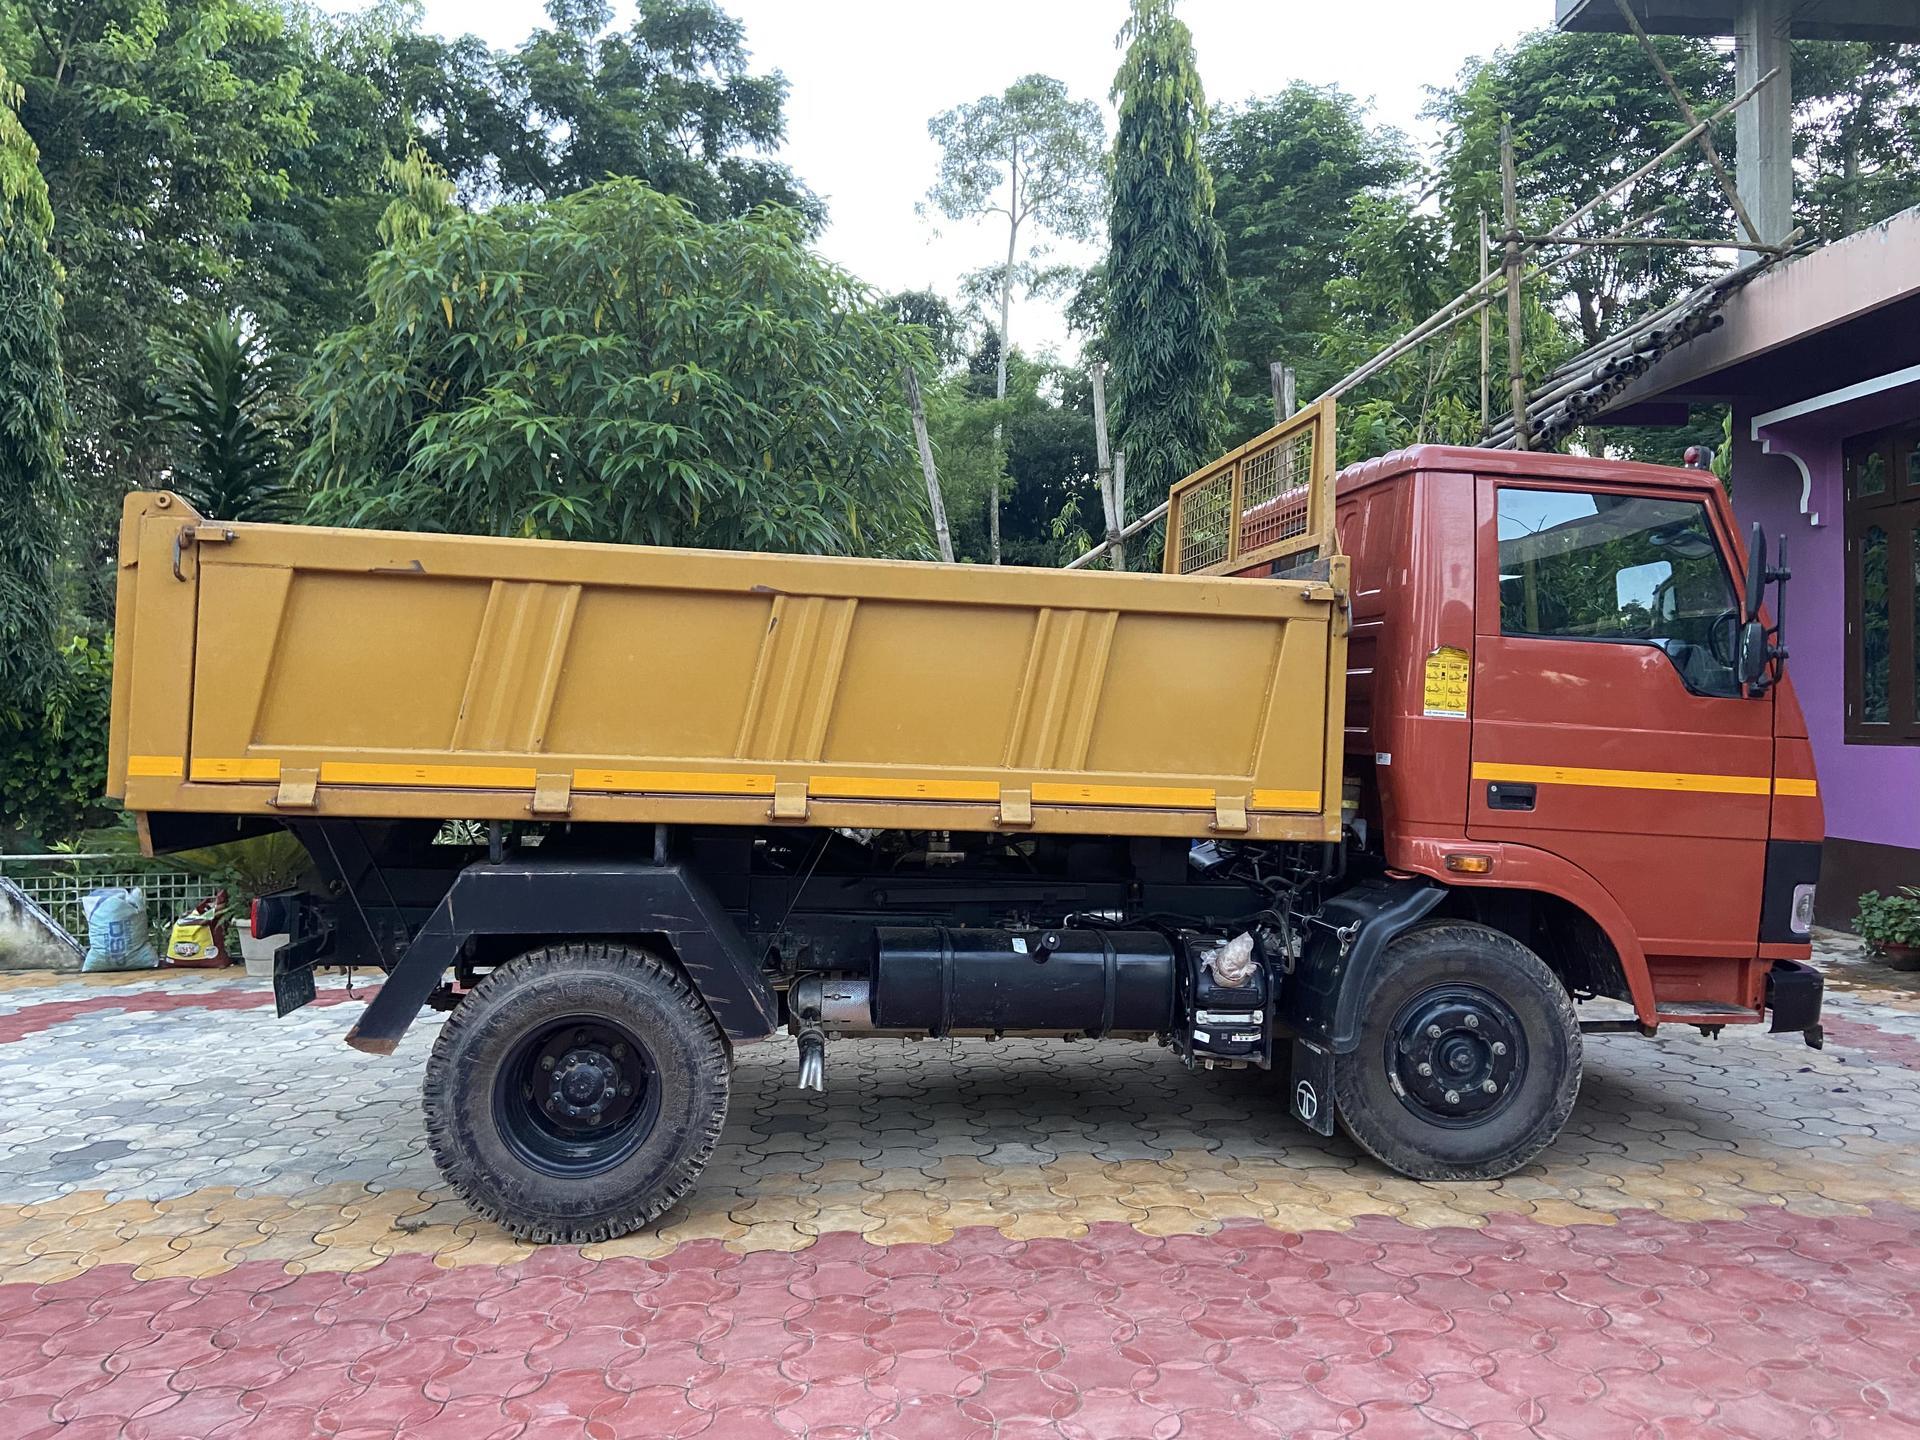 A new truck and fresh paving sits in front of the agent’s tea operation - Alliance Bioversity International - CIAT